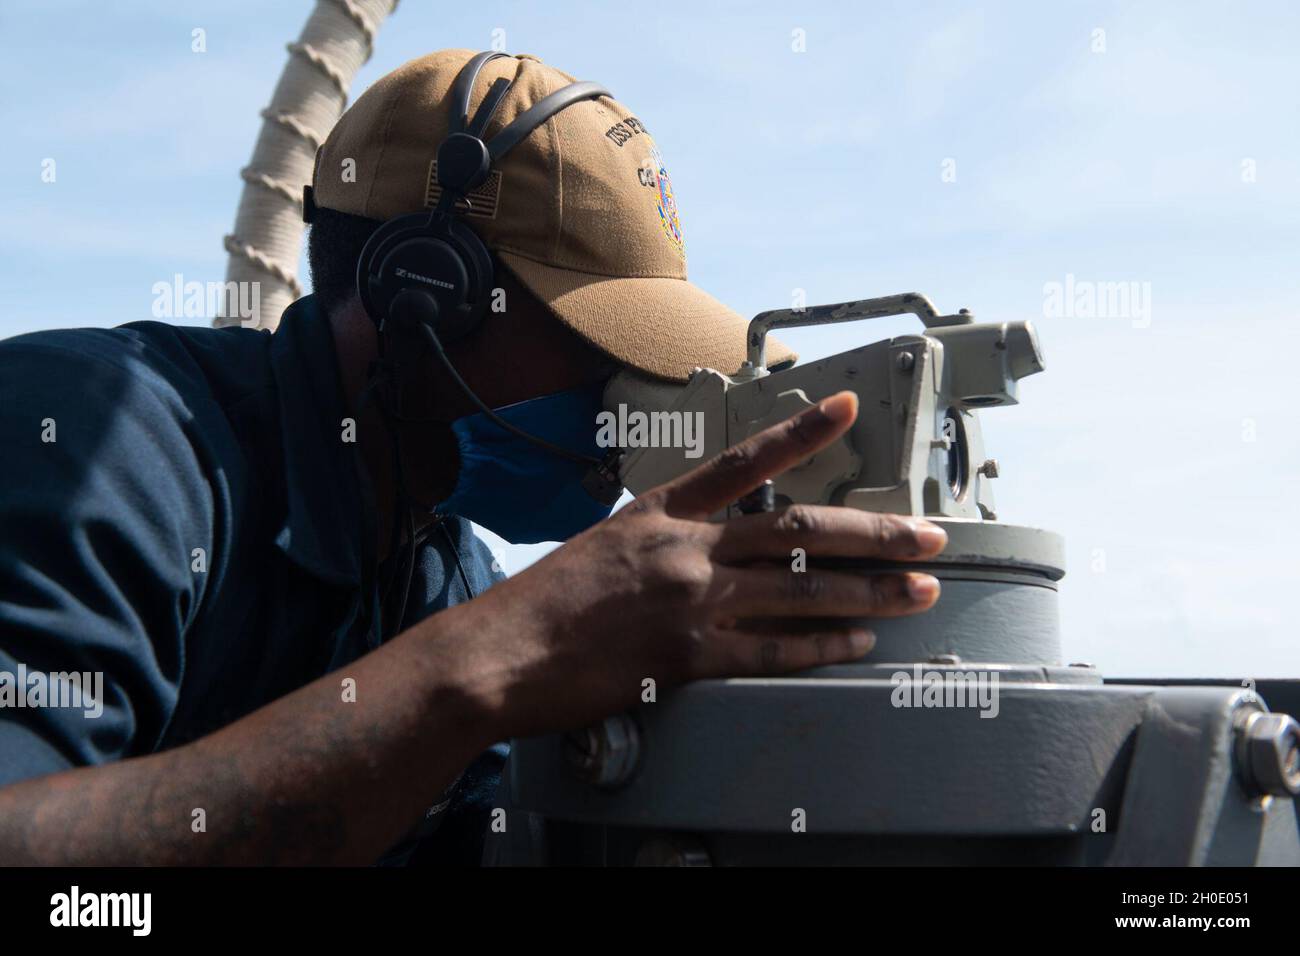 210205-N-OW019-0023 STRAIT OF MALACCA (Feb. 5, 2020) Quartermaster Seaman Vincent Green, from Jacksonville, Fla., uses a telescopic alidade to monitor the course of the guided-missile cruiser USS Princeton (CG 59) during a transit of the Strait of Malacca. Princeton is part of Nimitz Carrier Strike Group and is deployed conducting maritime security operations and theater security cooperation efforts. Stock Photo